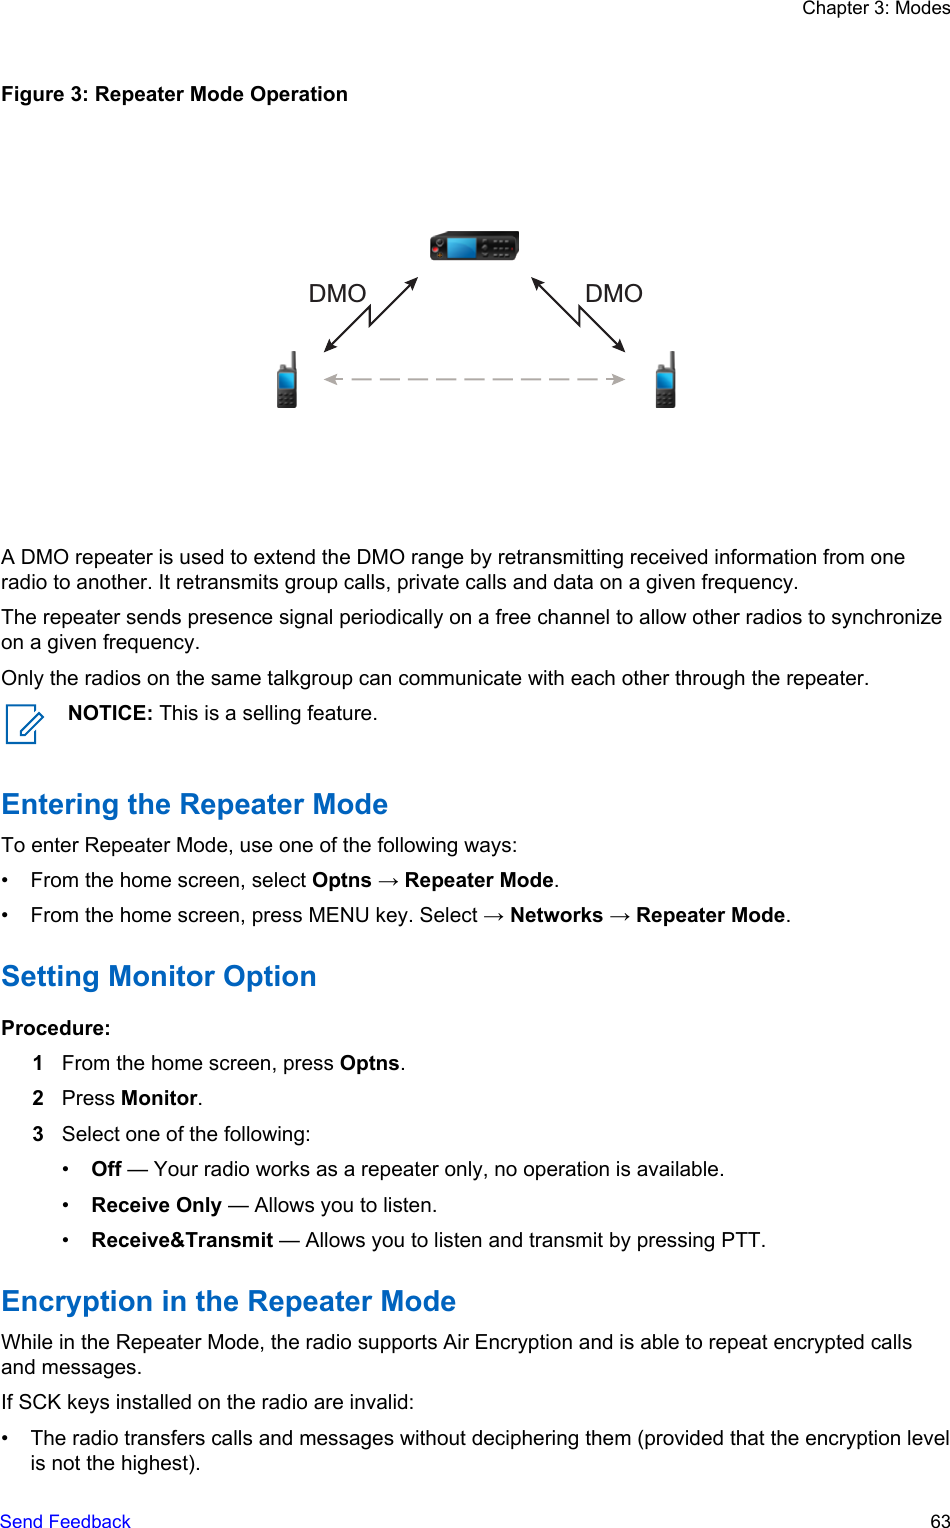 Figure 3: Repeater Mode OperationDMODMOA DMO repeater is used to extend the DMO range by retransmitting received information from oneradio to another. It retransmits group calls, private calls and data on a given frequency.The repeater sends presence signal periodically on a free channel to allow other radios to synchronizeon a given frequency.Only the radios on the same talkgroup can communicate with each other through the repeater.NOTICE: This is a selling feature.Entering the Repeater ModeTo enter Repeater Mode, use one of the following ways:• From the home screen, select Optns → Repeater Mode.• From the home screen, press MENU key. Select → Networks → Repeater Mode.Setting Monitor OptionProcedure:1From the home screen, press Optns.2Press Monitor.3Select one of the following:•Off — Your radio works as a repeater only, no operation is available.•Receive Only — Allows you to listen.•Receive&amp;Transmit — Allows you to listen and transmit by pressing PTT.Encryption in the Repeater ModeWhile in the Repeater Mode, the radio supports Air Encryption and is able to repeat encrypted callsand messages.If SCK keys installed on the radio are invalid:• The radio transfers calls and messages without deciphering them (provided that the encryption levelis not the highest).Chapter 3: ModesSend Feedback   63